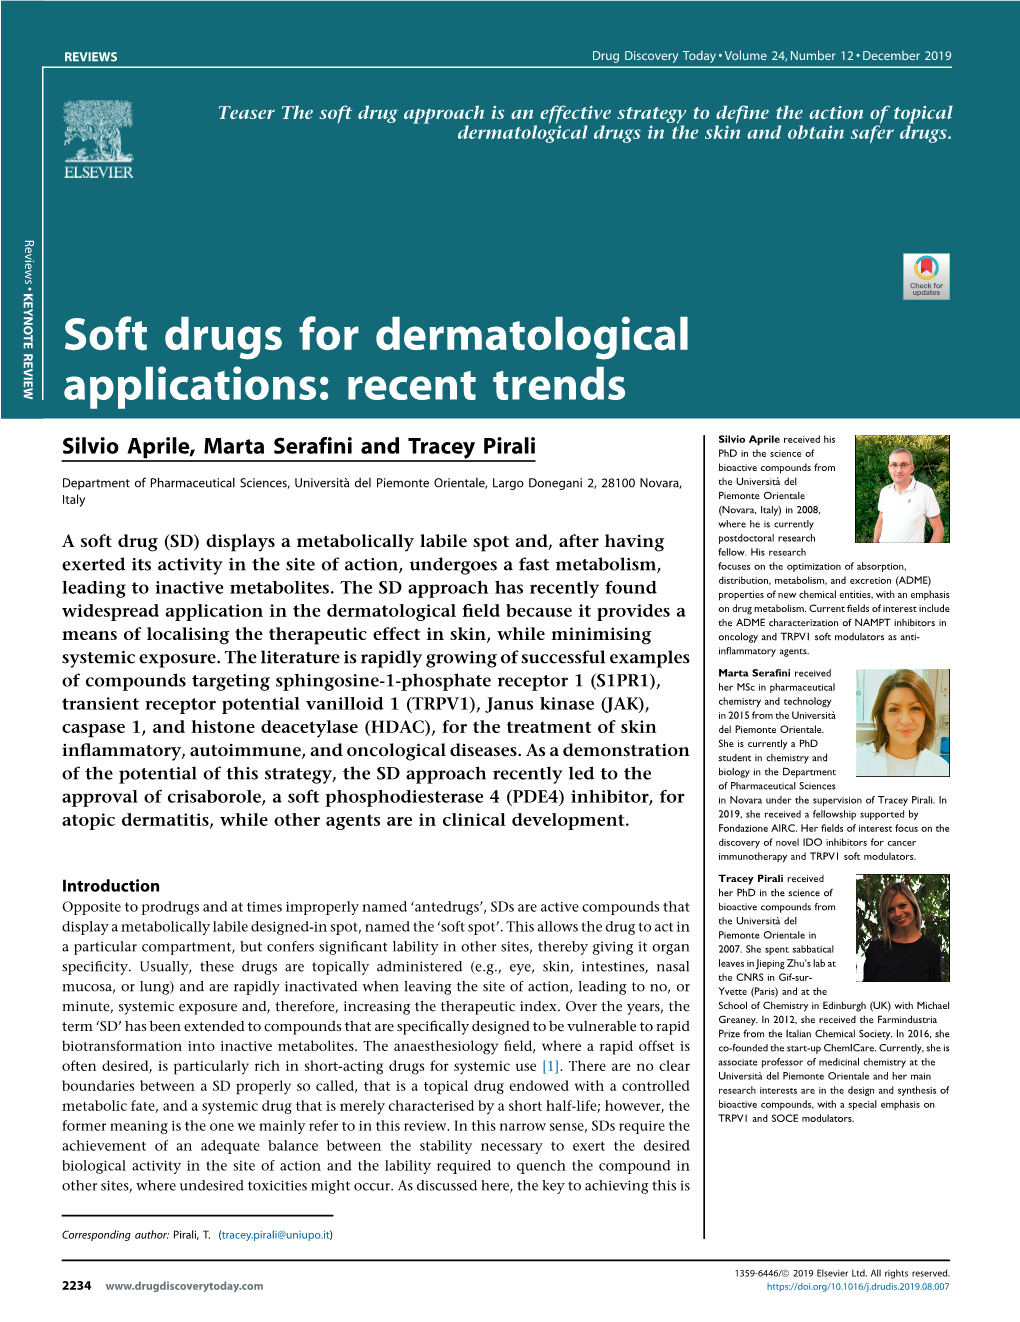 Soft Drugs for Dermatological Applications: Recent Trends